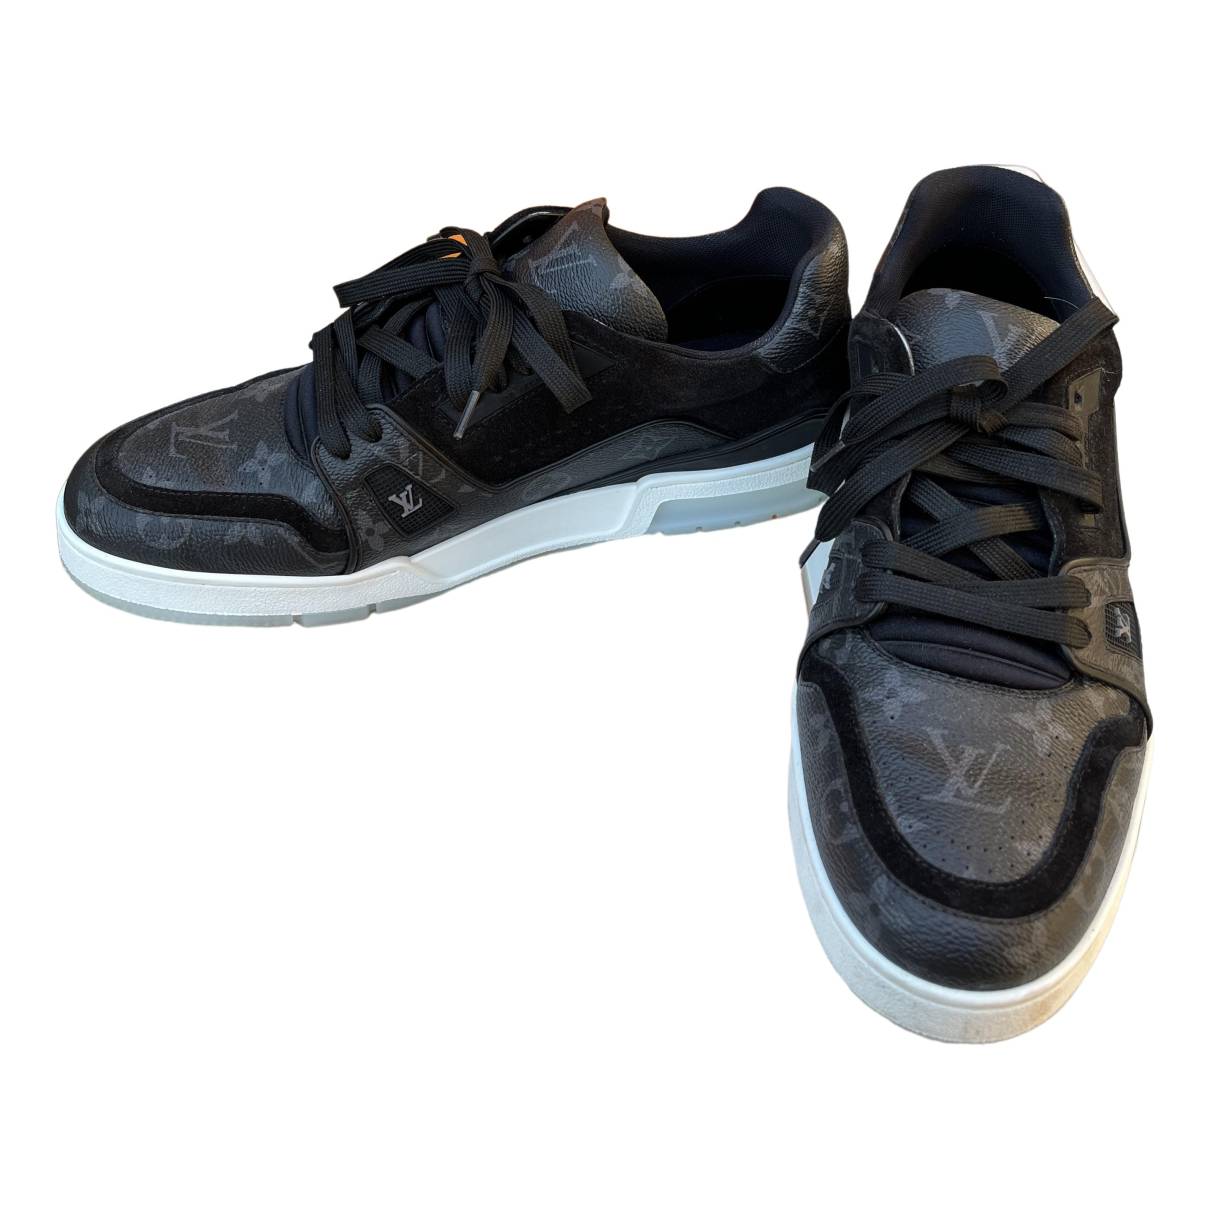 Lv trainer cloth low trainers Louis Vuitton Anthracite size 43.5